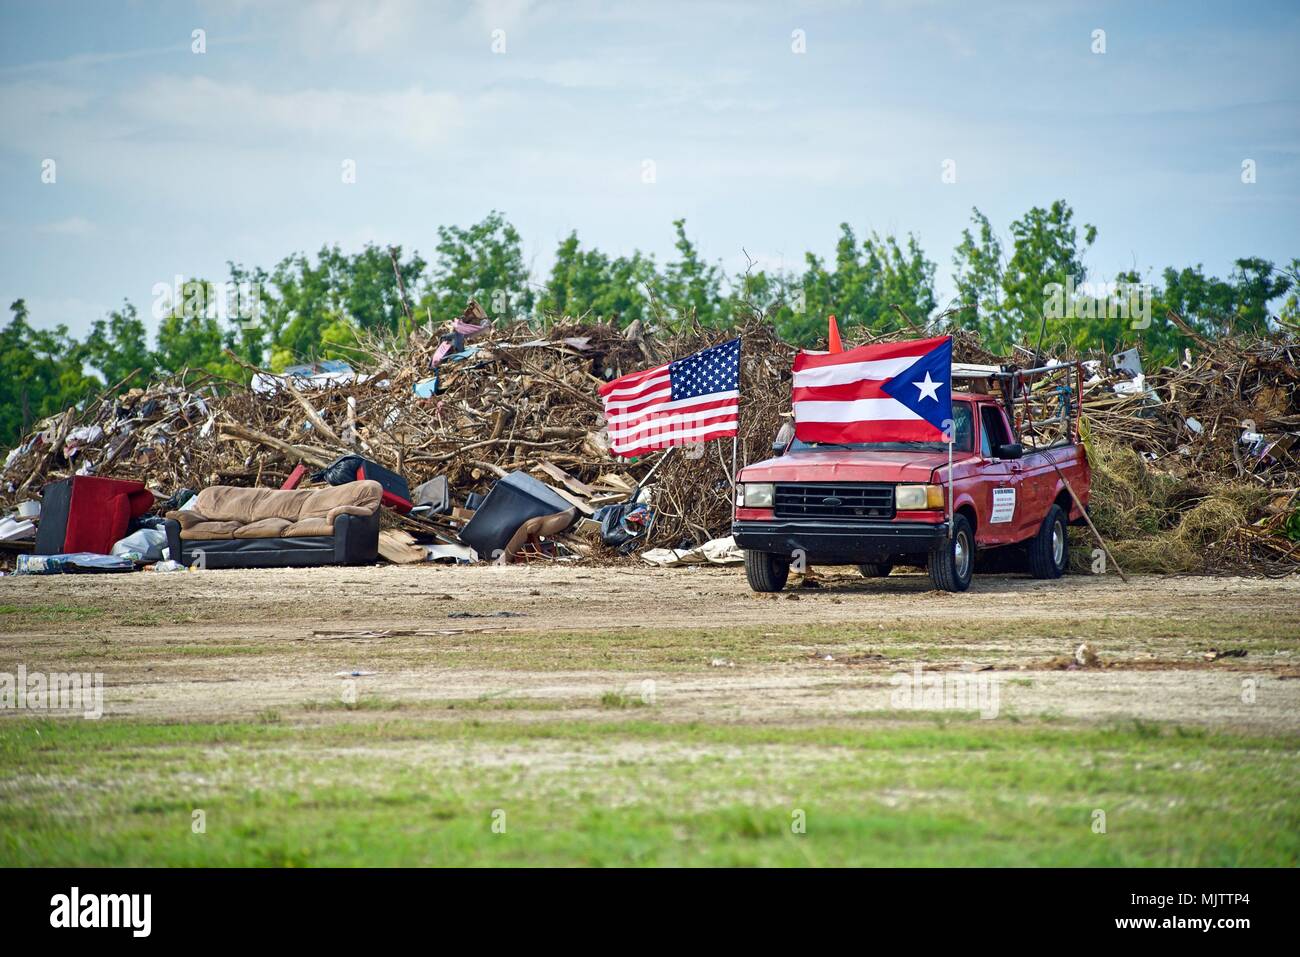 BARCELONETA, Puerto Rico, December 12, 2017 – Puerto Rico and U.S. flags  wave in front of a massive debris drop-off site in Barceloneta. Couches,  televisions, refrigerators, toys, clothing, and books were among